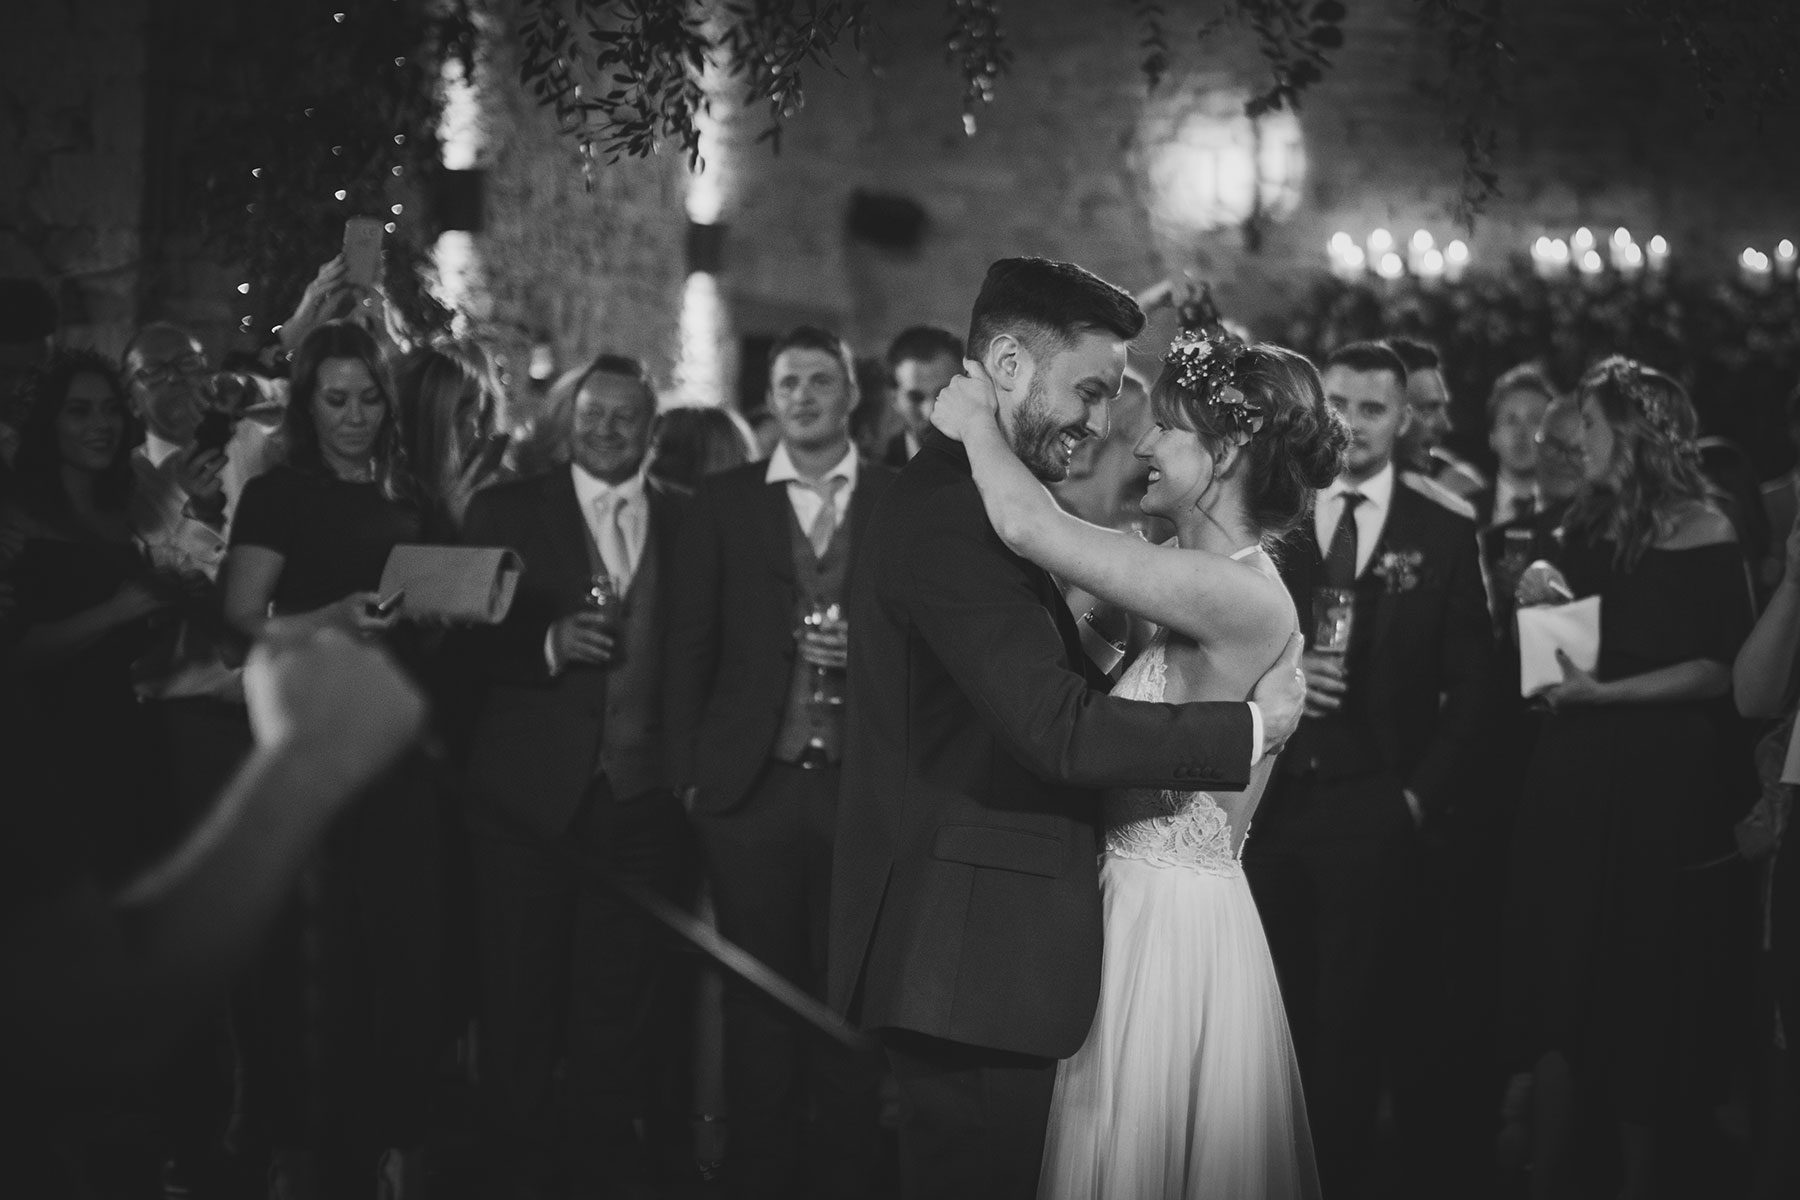 First Dance at Cripps Barn - Reportage Wedding Photography in Cheltenham | Bullit Photography